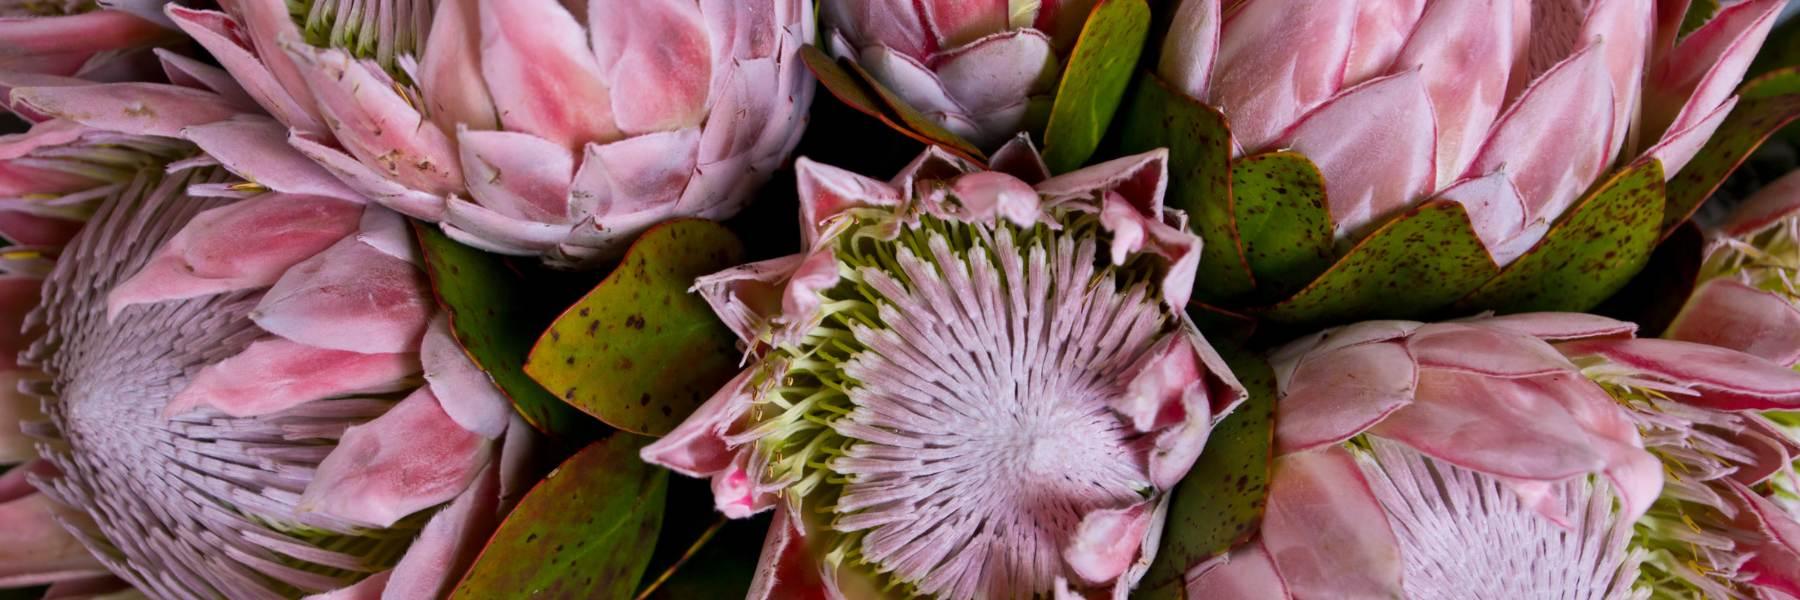 Proteas, king proteas, flower delivery, South Africa, florist near me, flowers delivered near me